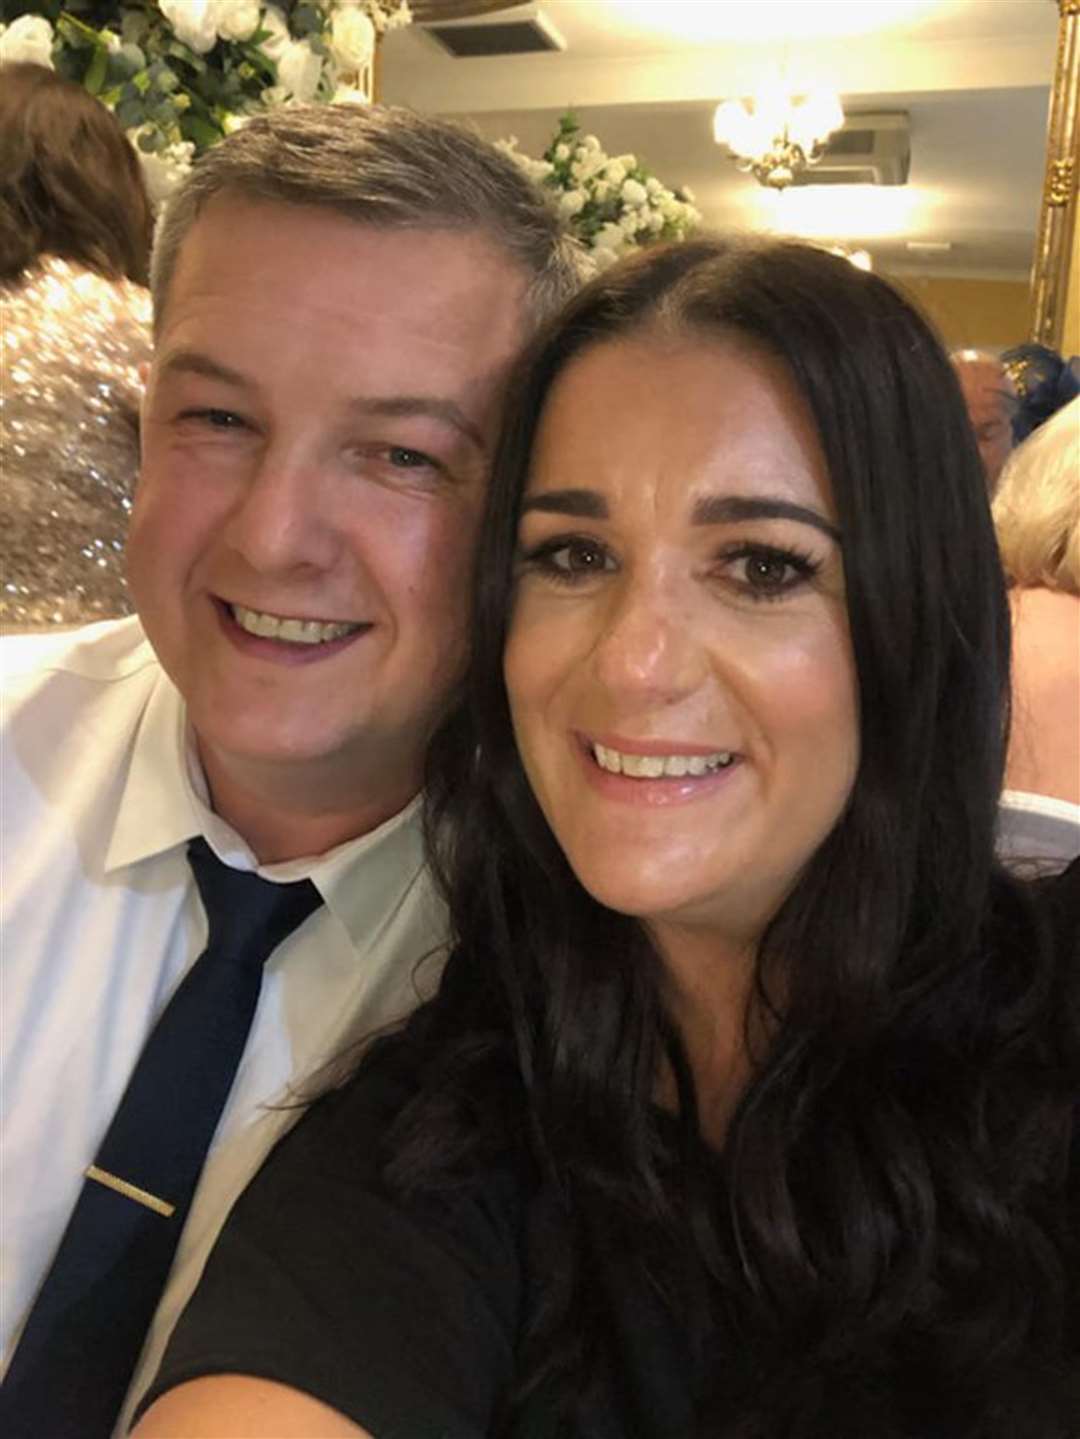 David Perry, the taxi driver who survived the Liverpool terror attack, with his wife Rachel